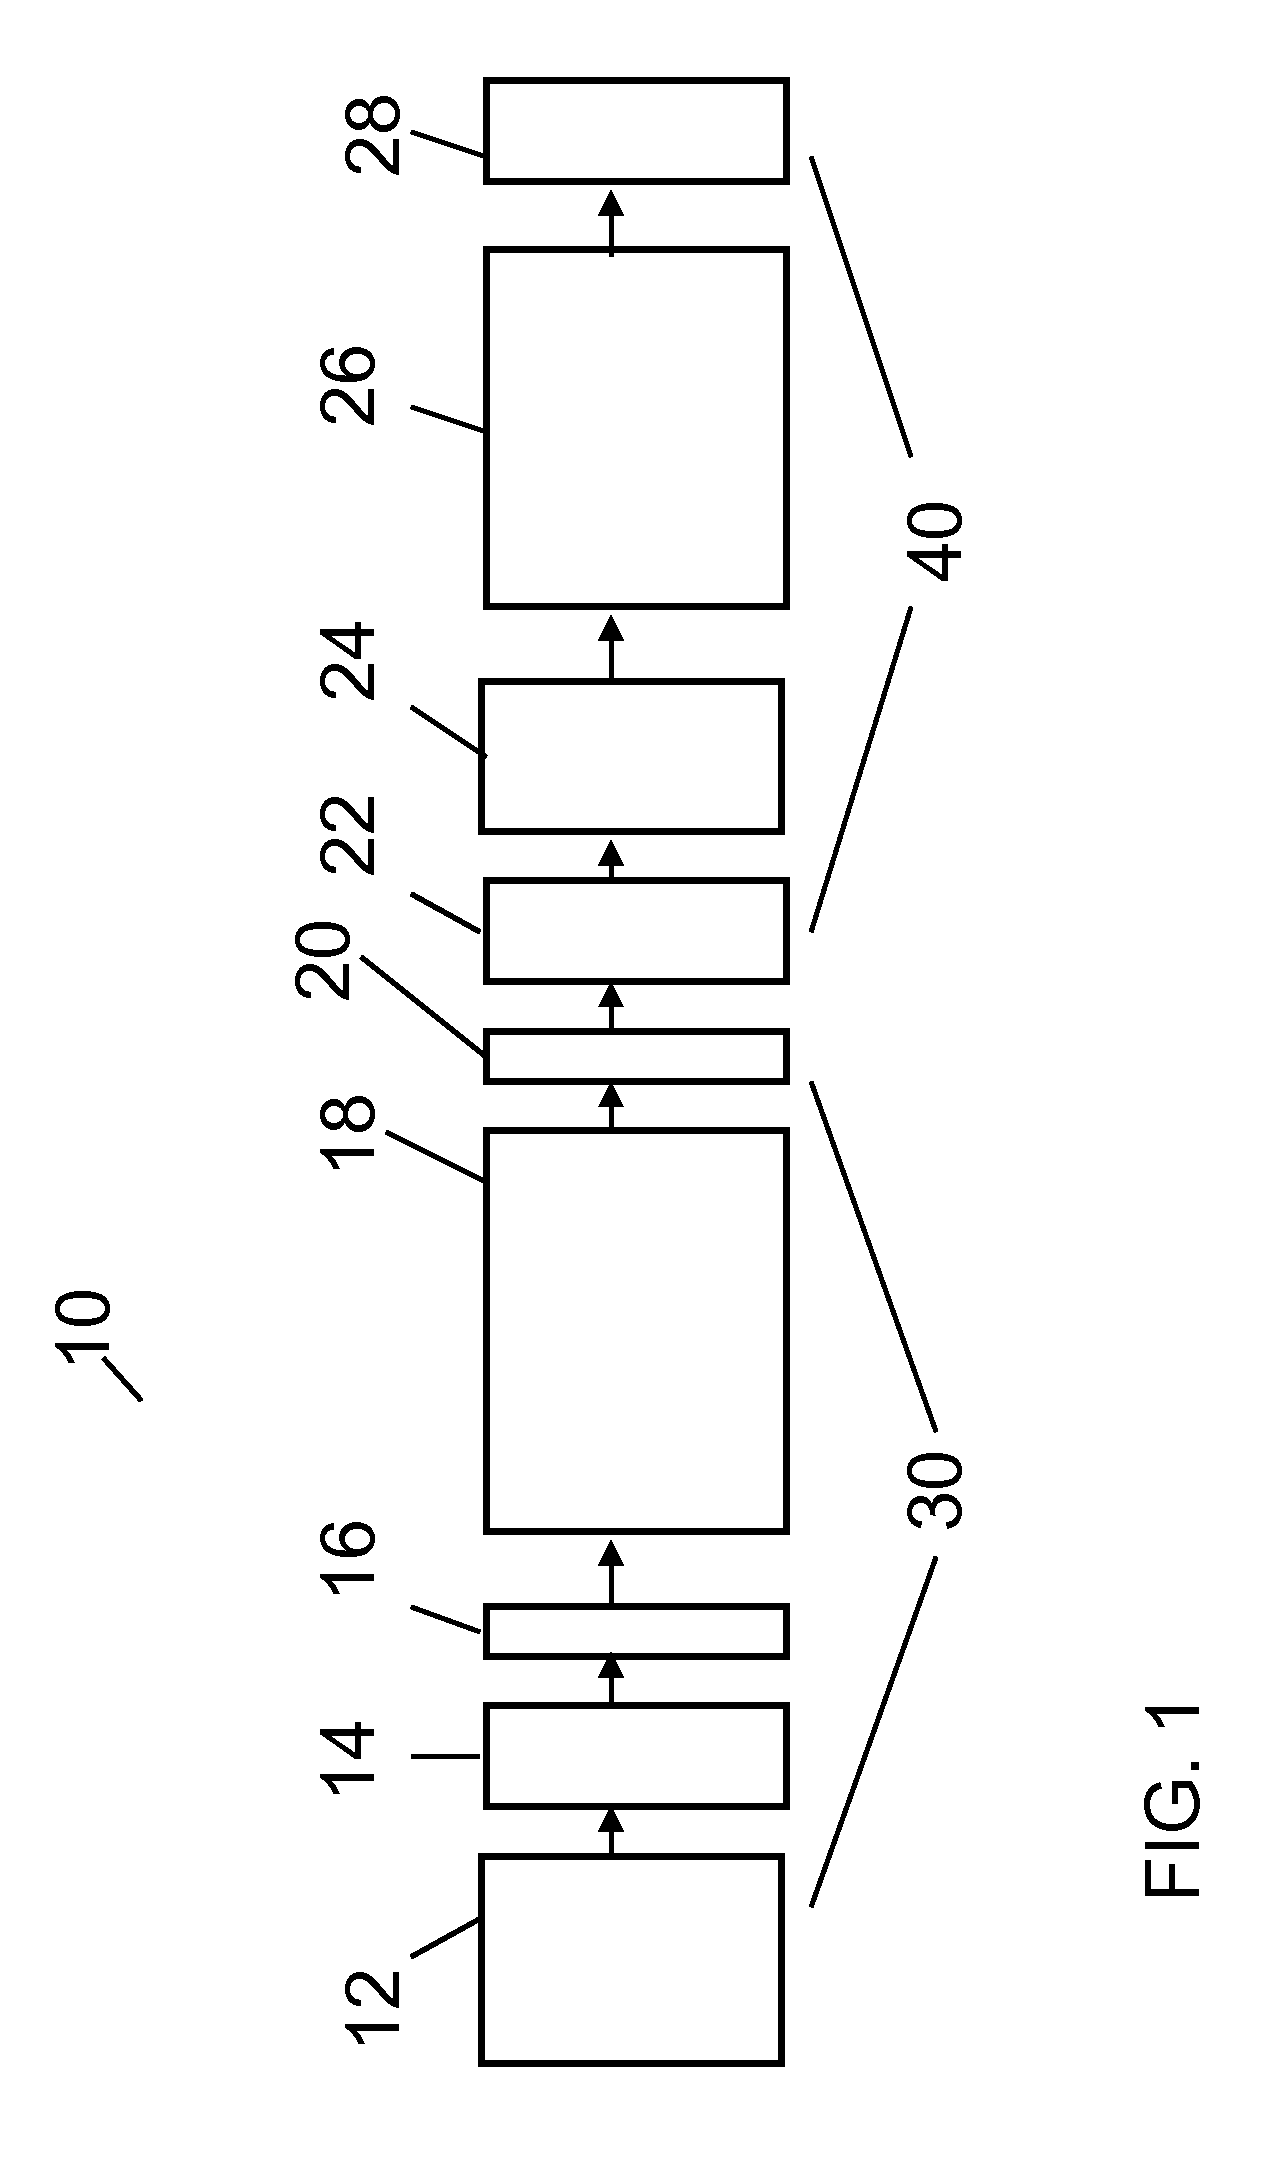 Tandem TOF Mass Spectrometer With Pulsed Accelerator To Reduce Velocity Spread